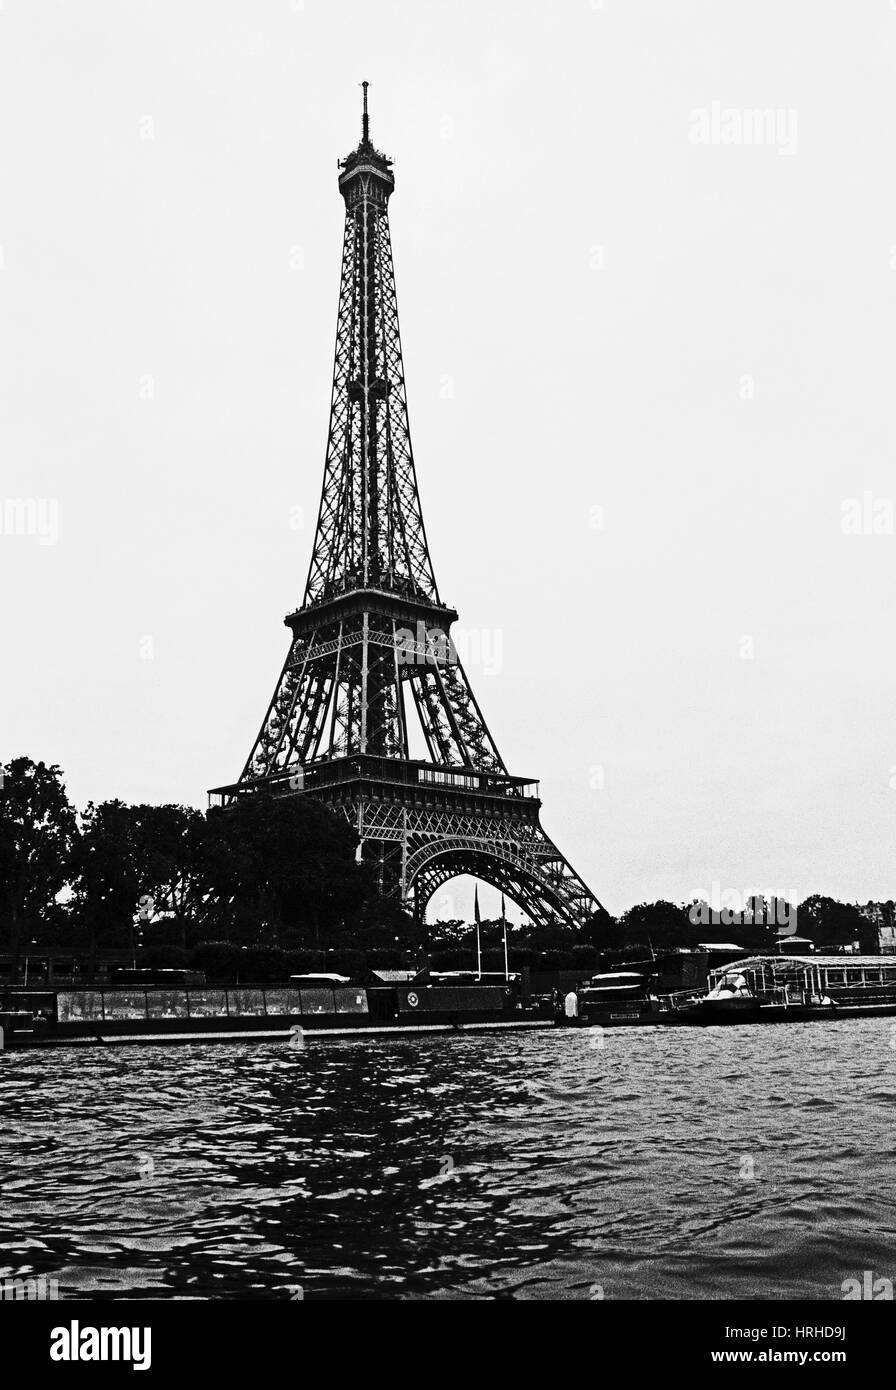 Eiffel Tower in Paris from the River Seine in black and white with the contrast kicked up for a stark image. Stock Photo